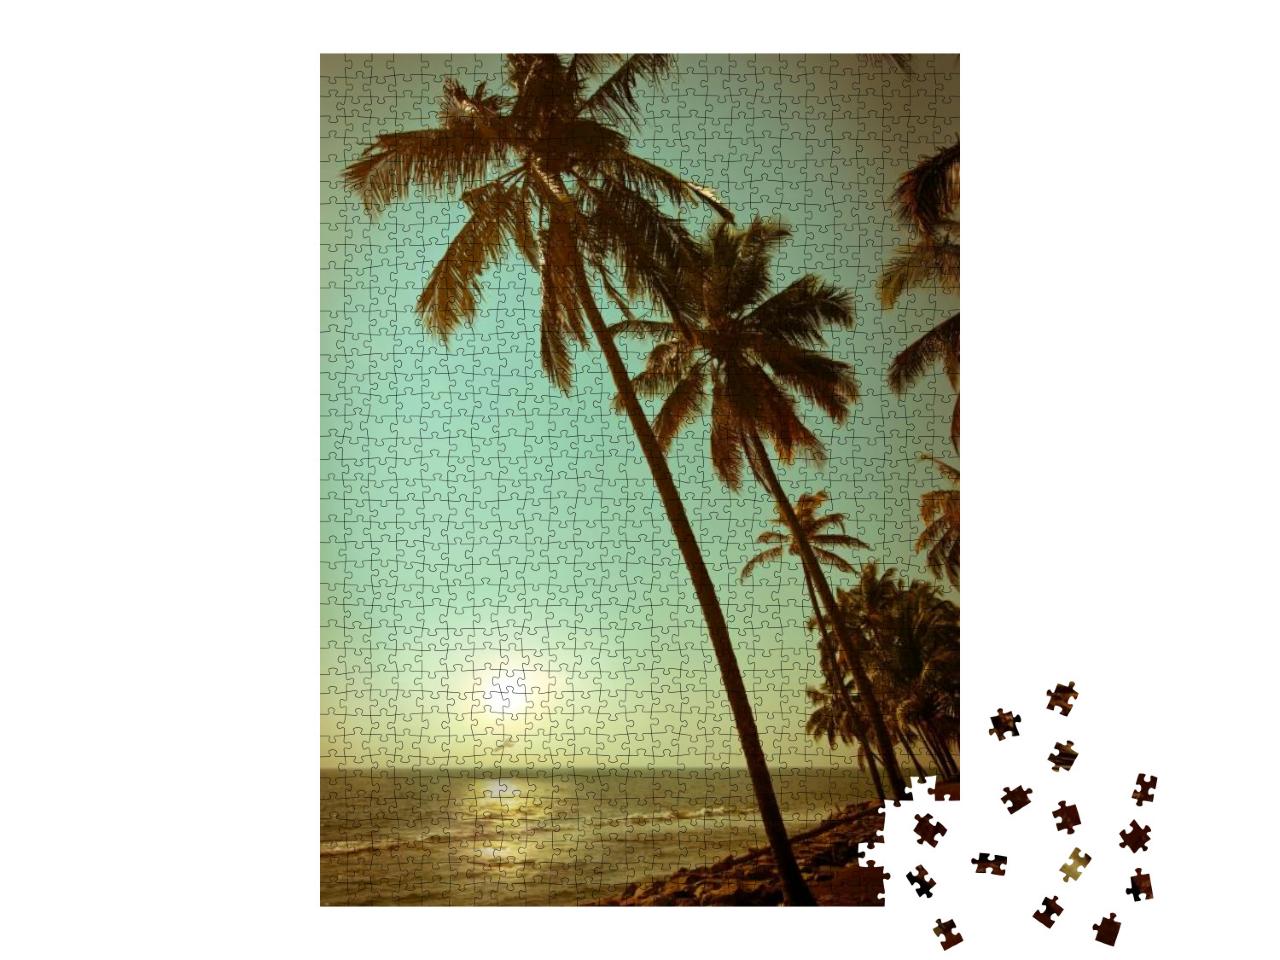 Beautiful Sunset At Tropical Beach with Palm Trees. Ocean... Jigsaw Puzzle with 1000 pieces